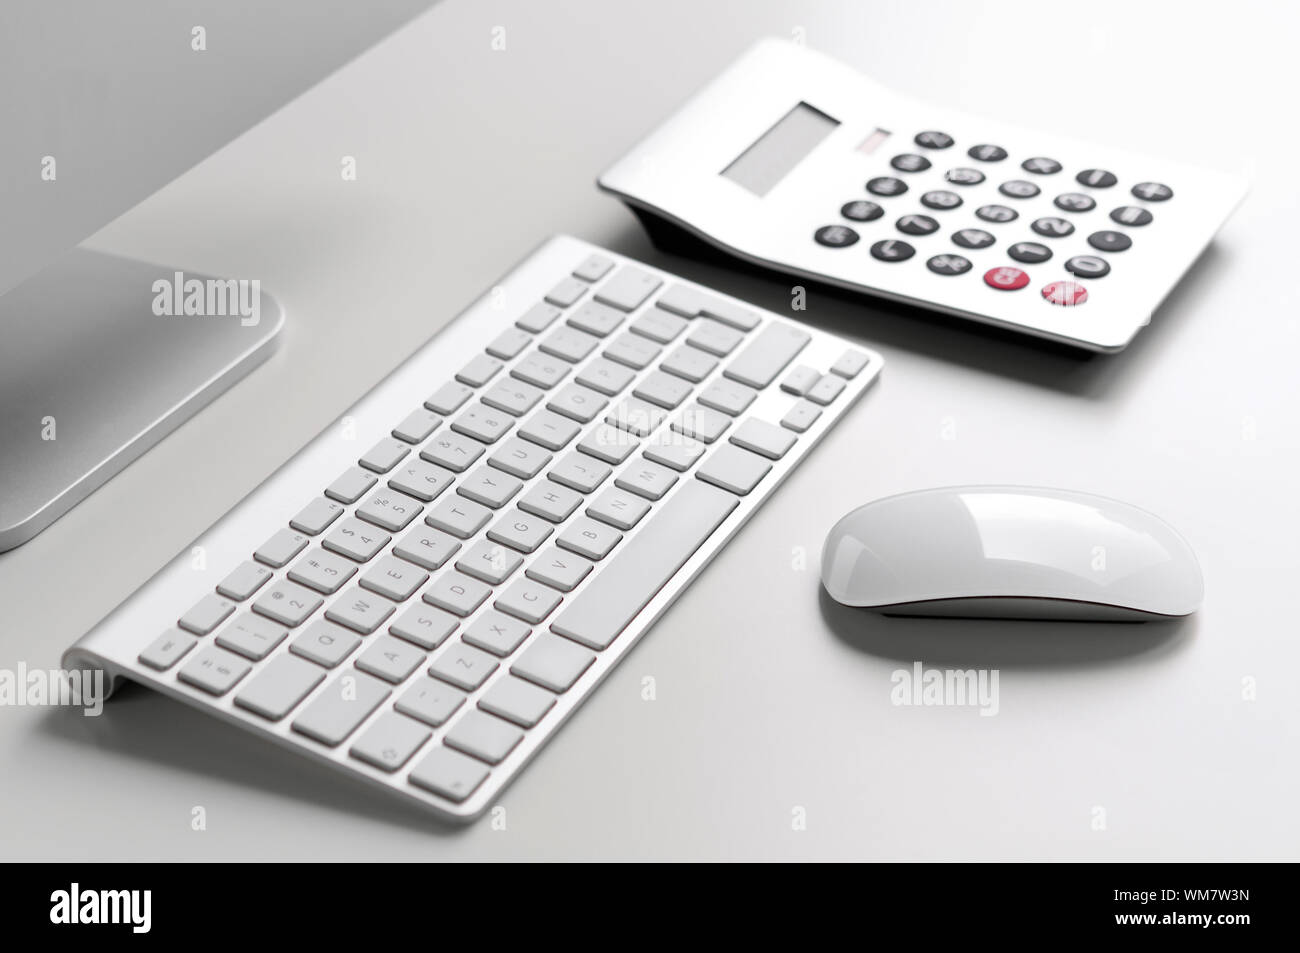 White Desk With Computer Keyboard Mouse And Calculator With